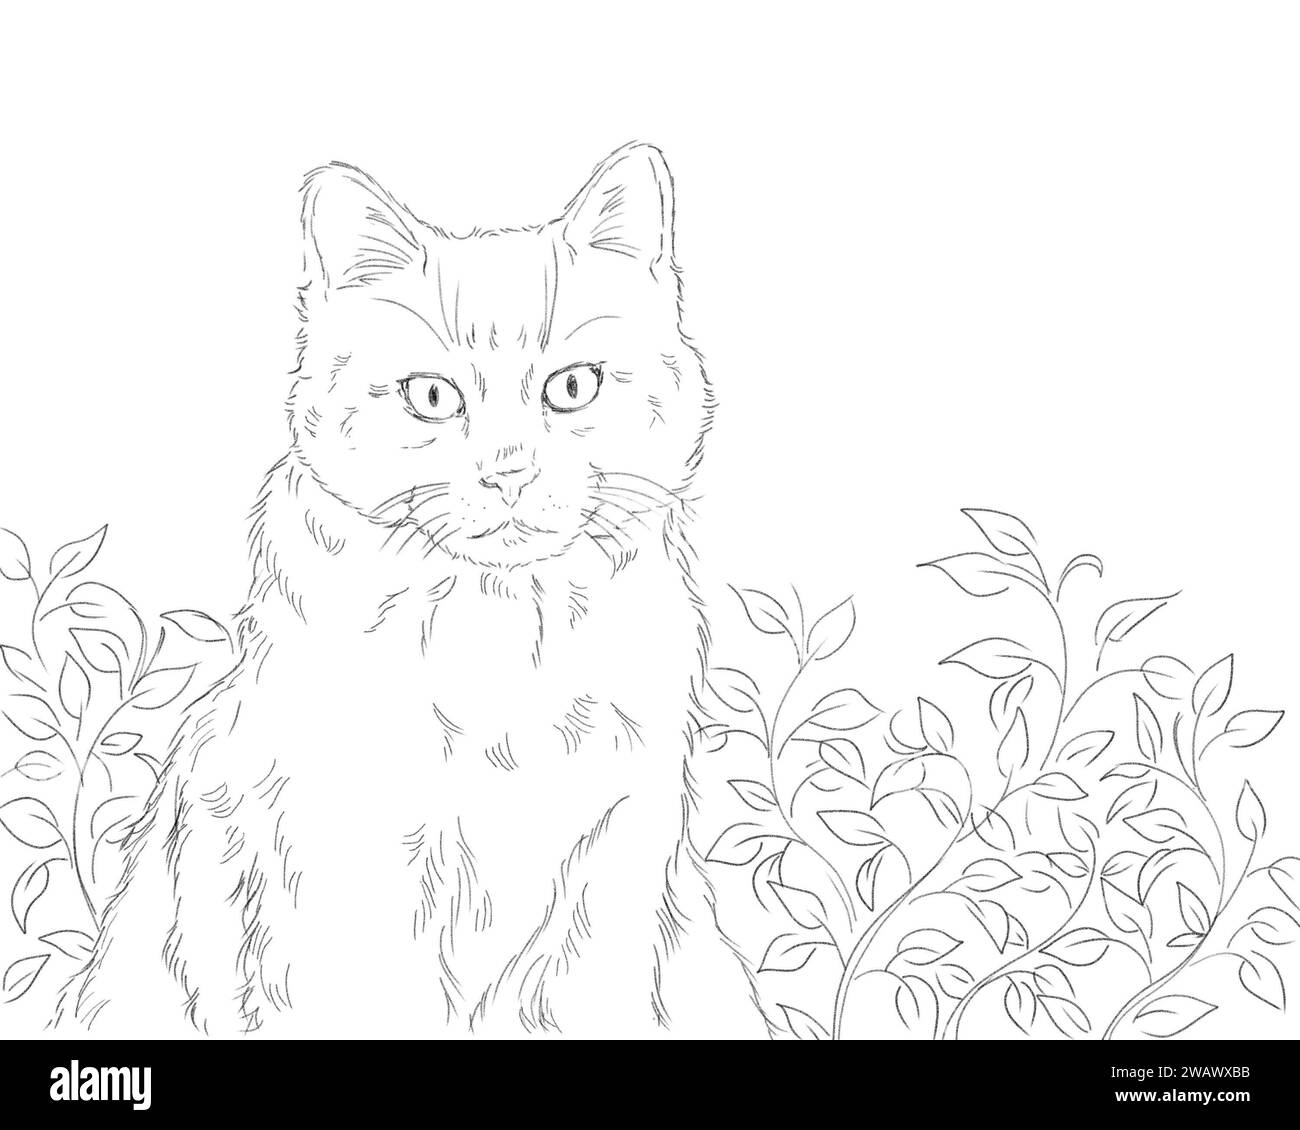 Portrait of a cute adorable cat sitting in outdoor nature background. Artistic sketch pencil drawing black and white. Pet animal concept. Stock Photo